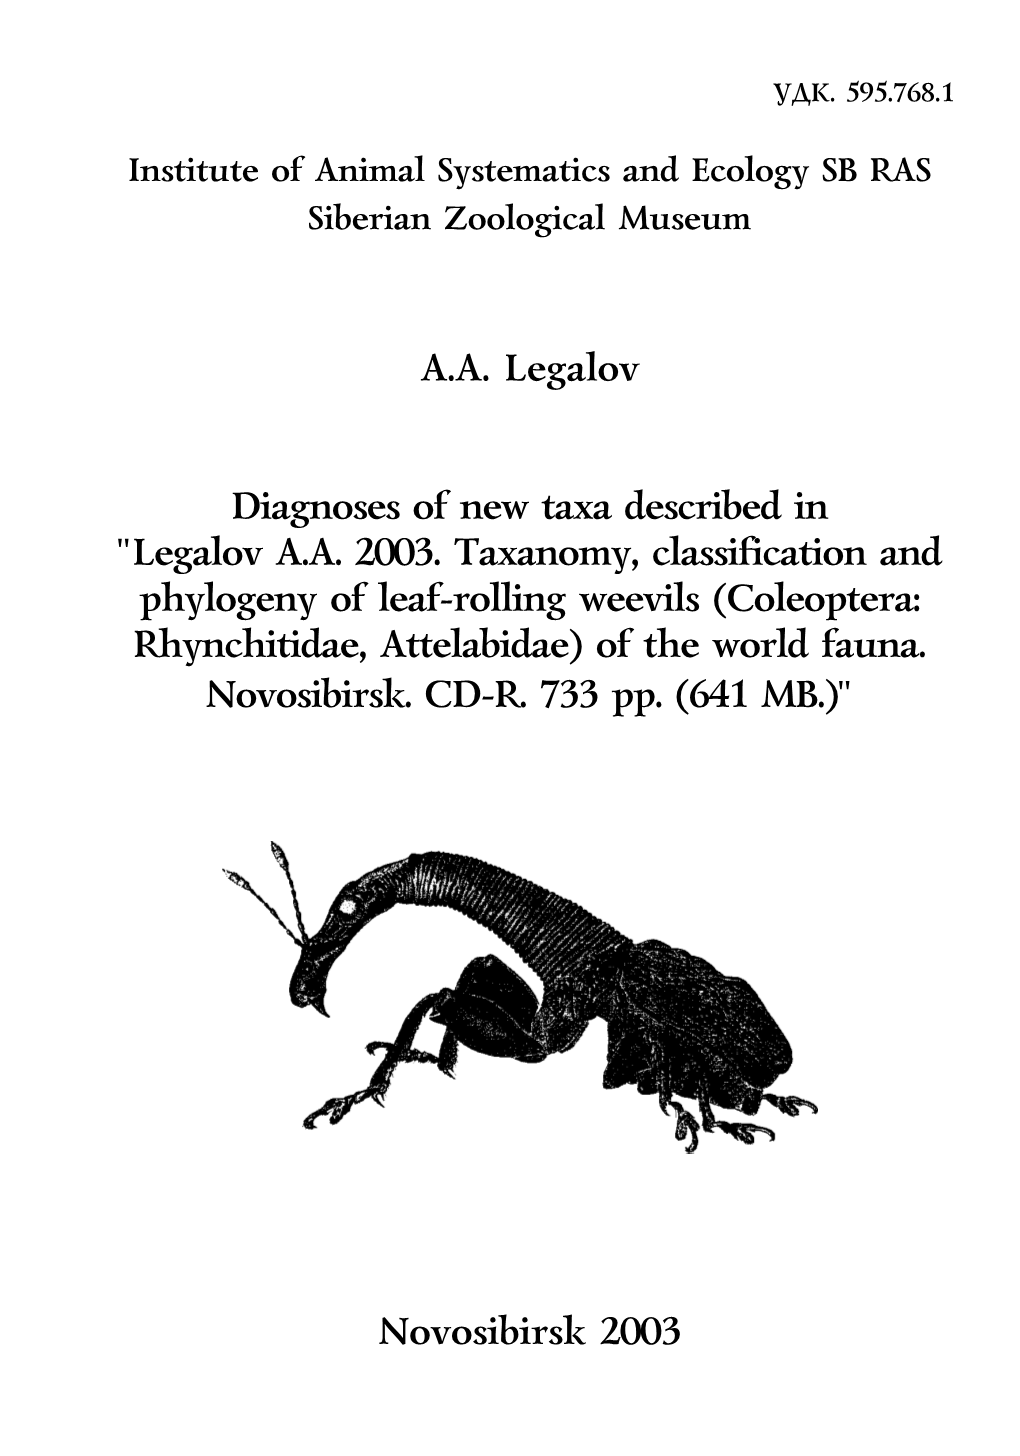 Legalov AA 2003. Taxanomy, Classification and Phylogeny of Leaf-Rolling